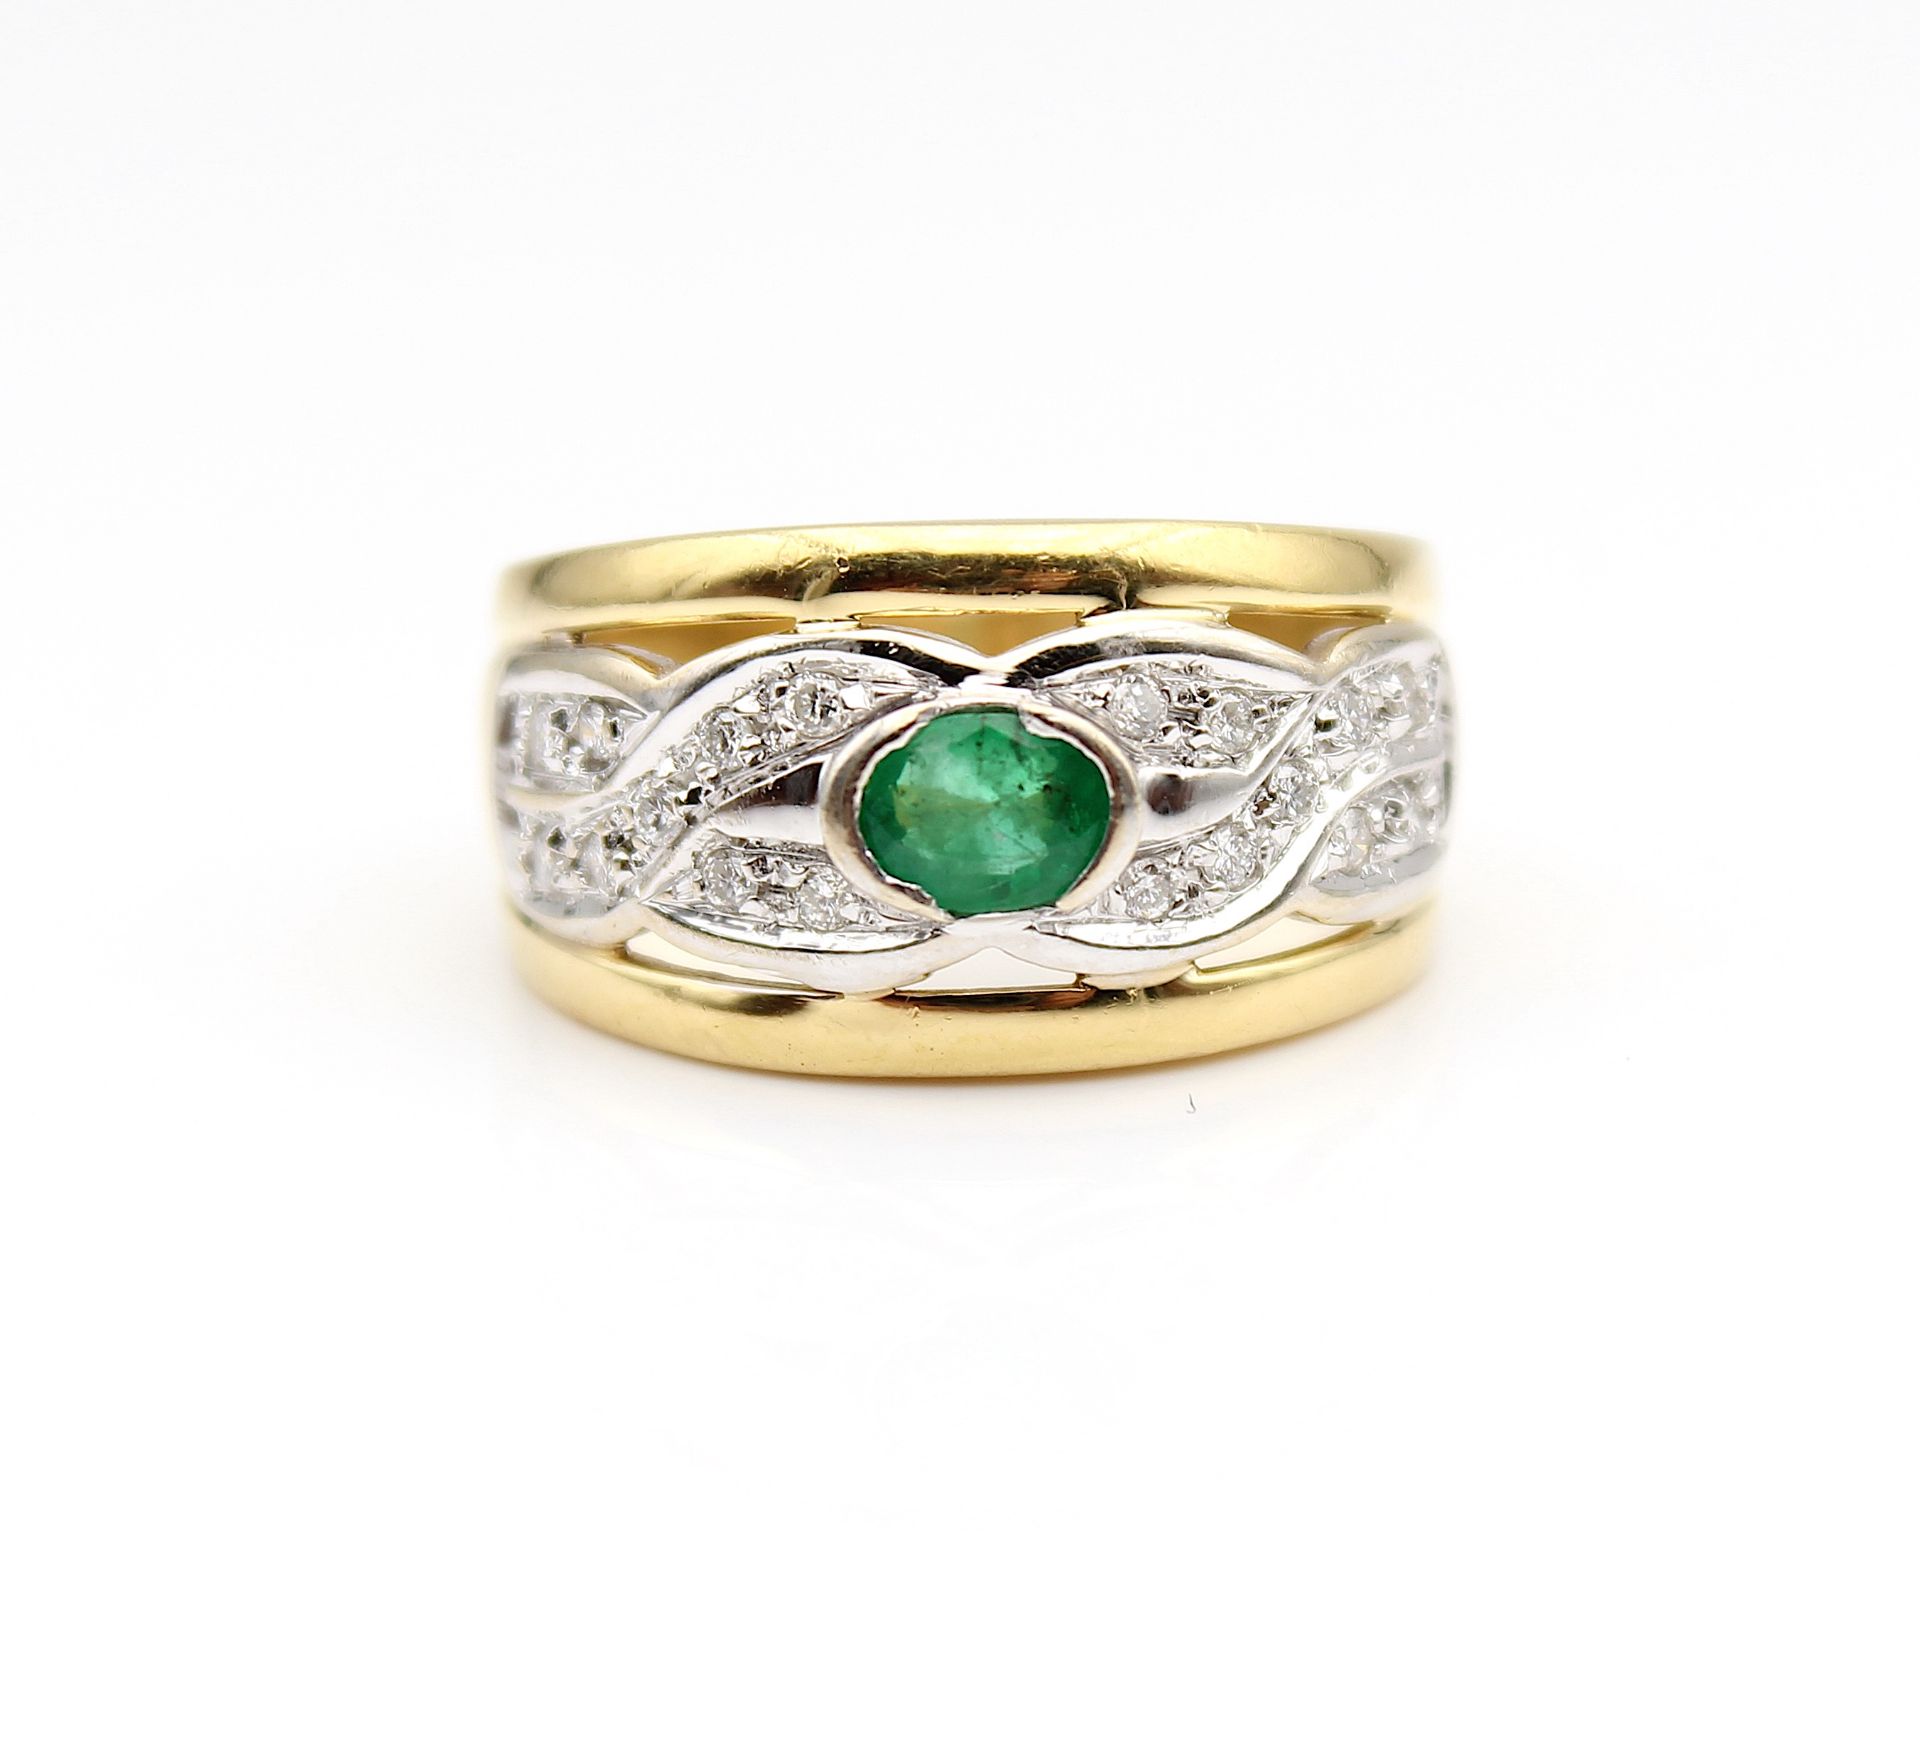 Charming ring with emerald and brilliants